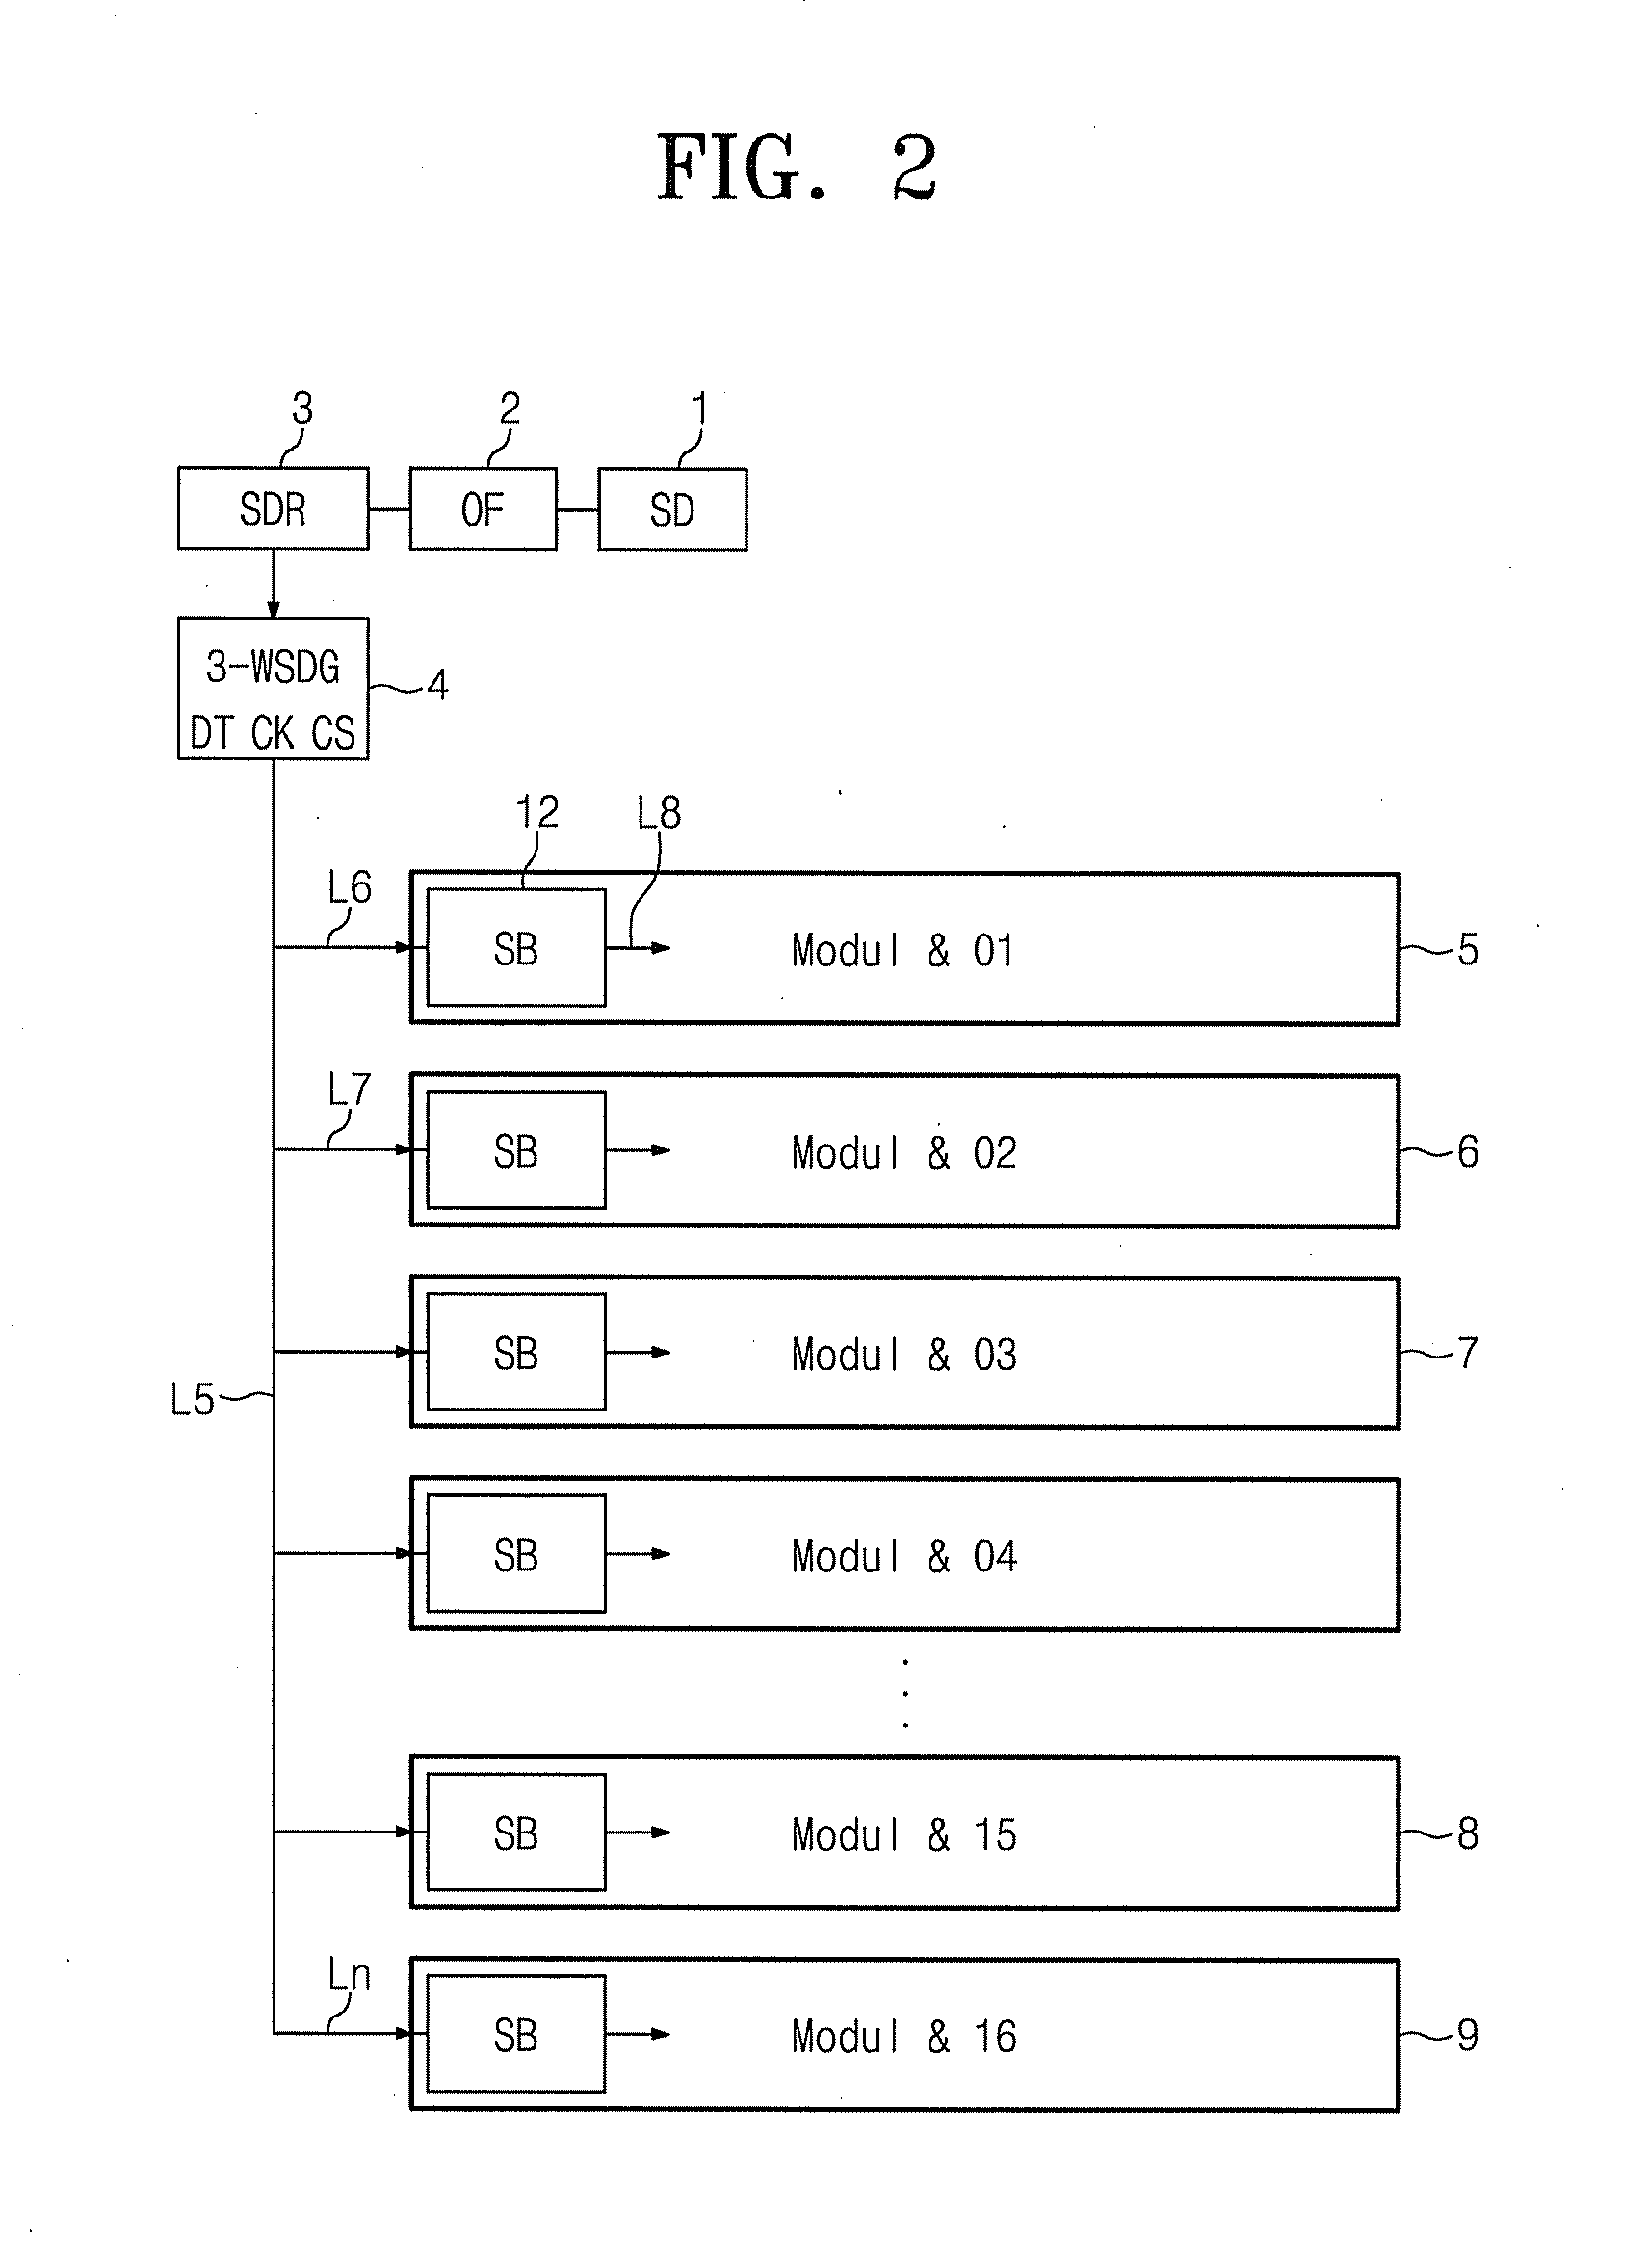 Digital signal transmitting apparatus for adjusting multi-channel superconducting quantum interference device